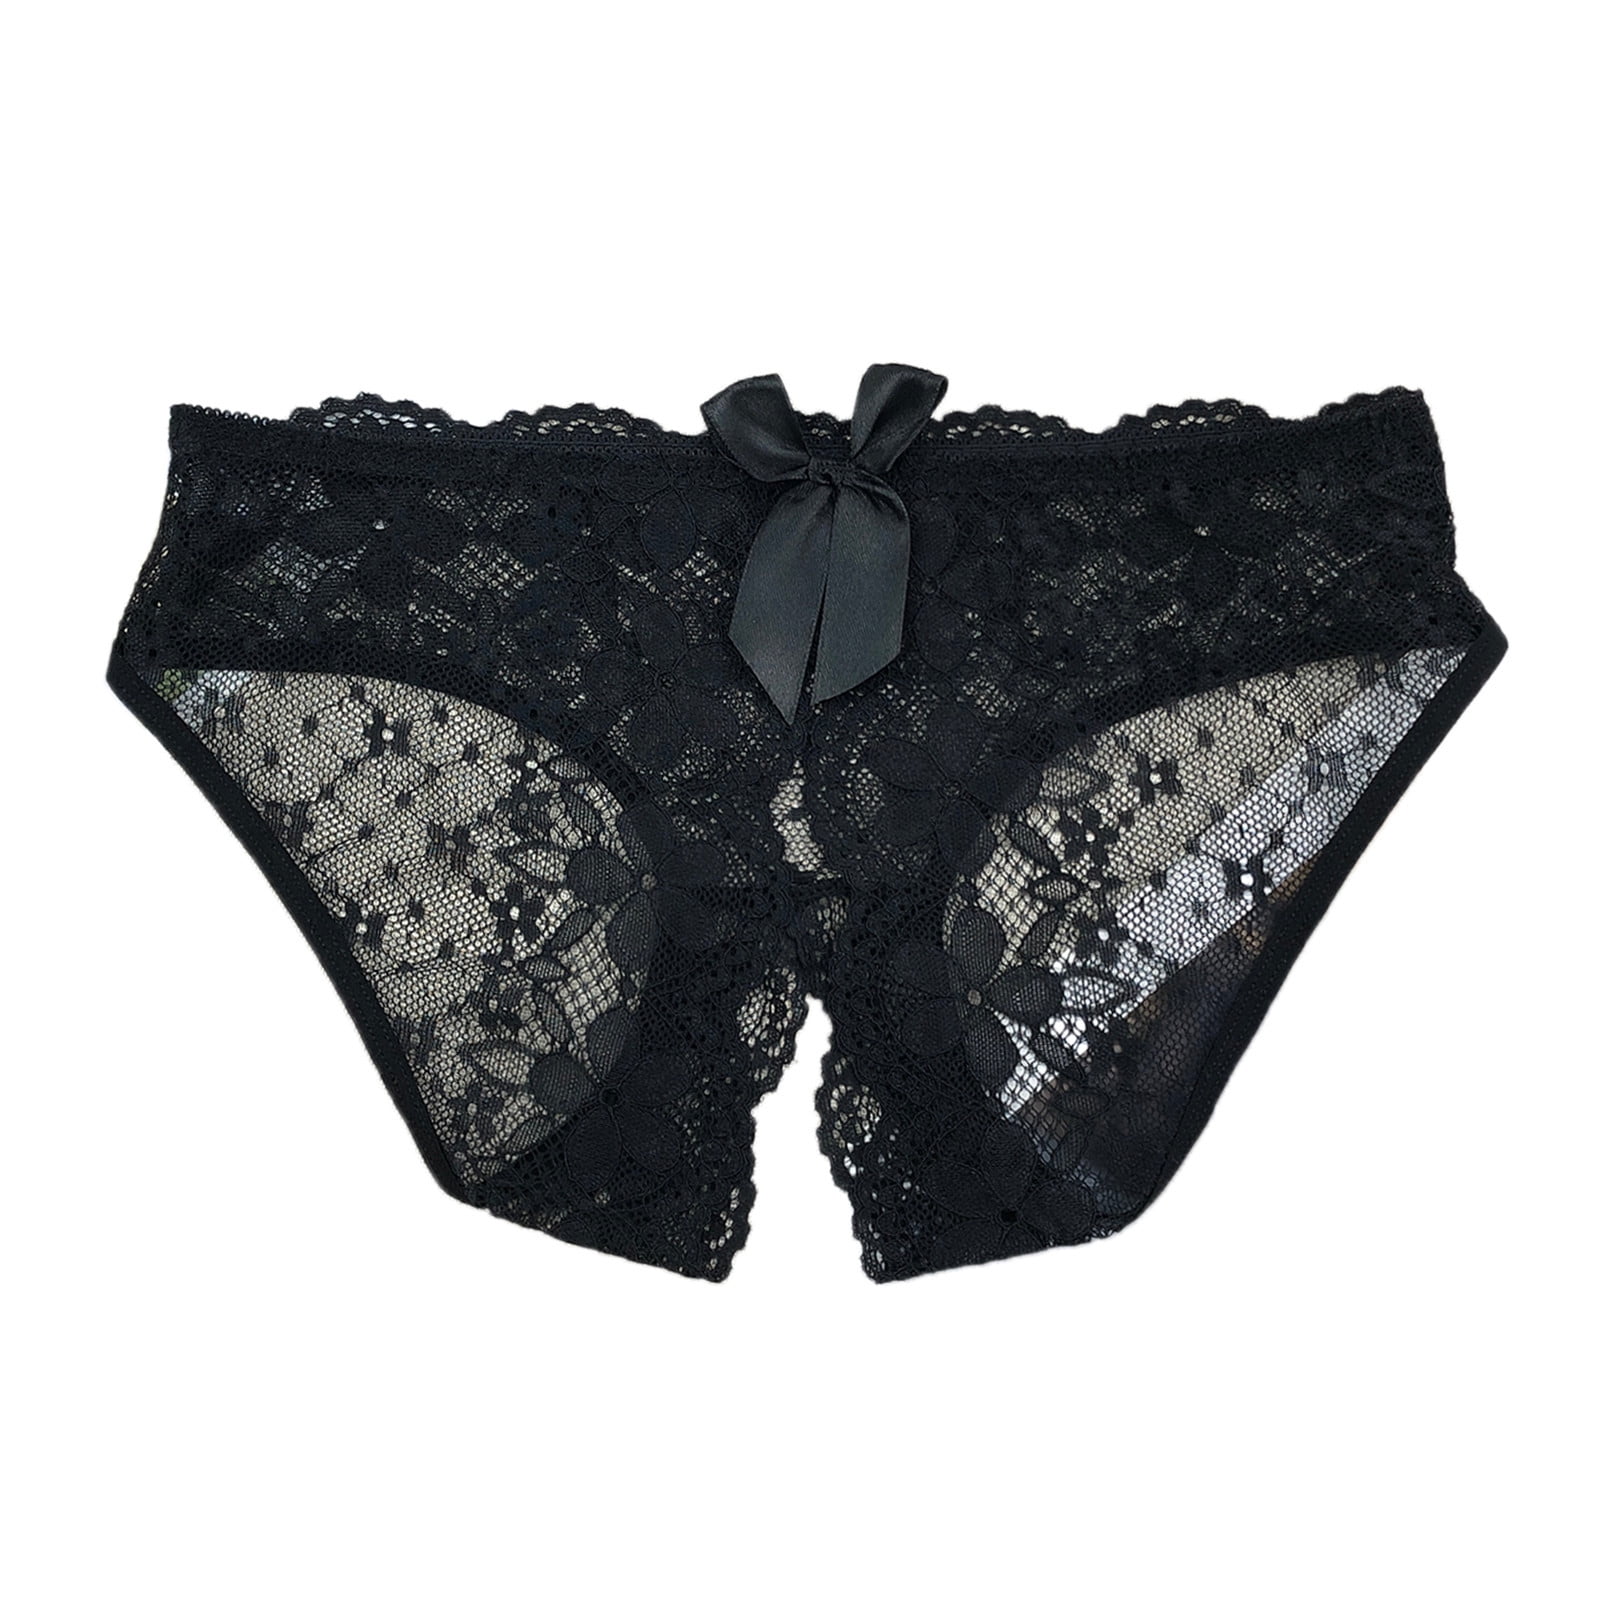 Cathalem High Cut Lace Panties for Women Womens Fit Microfiber